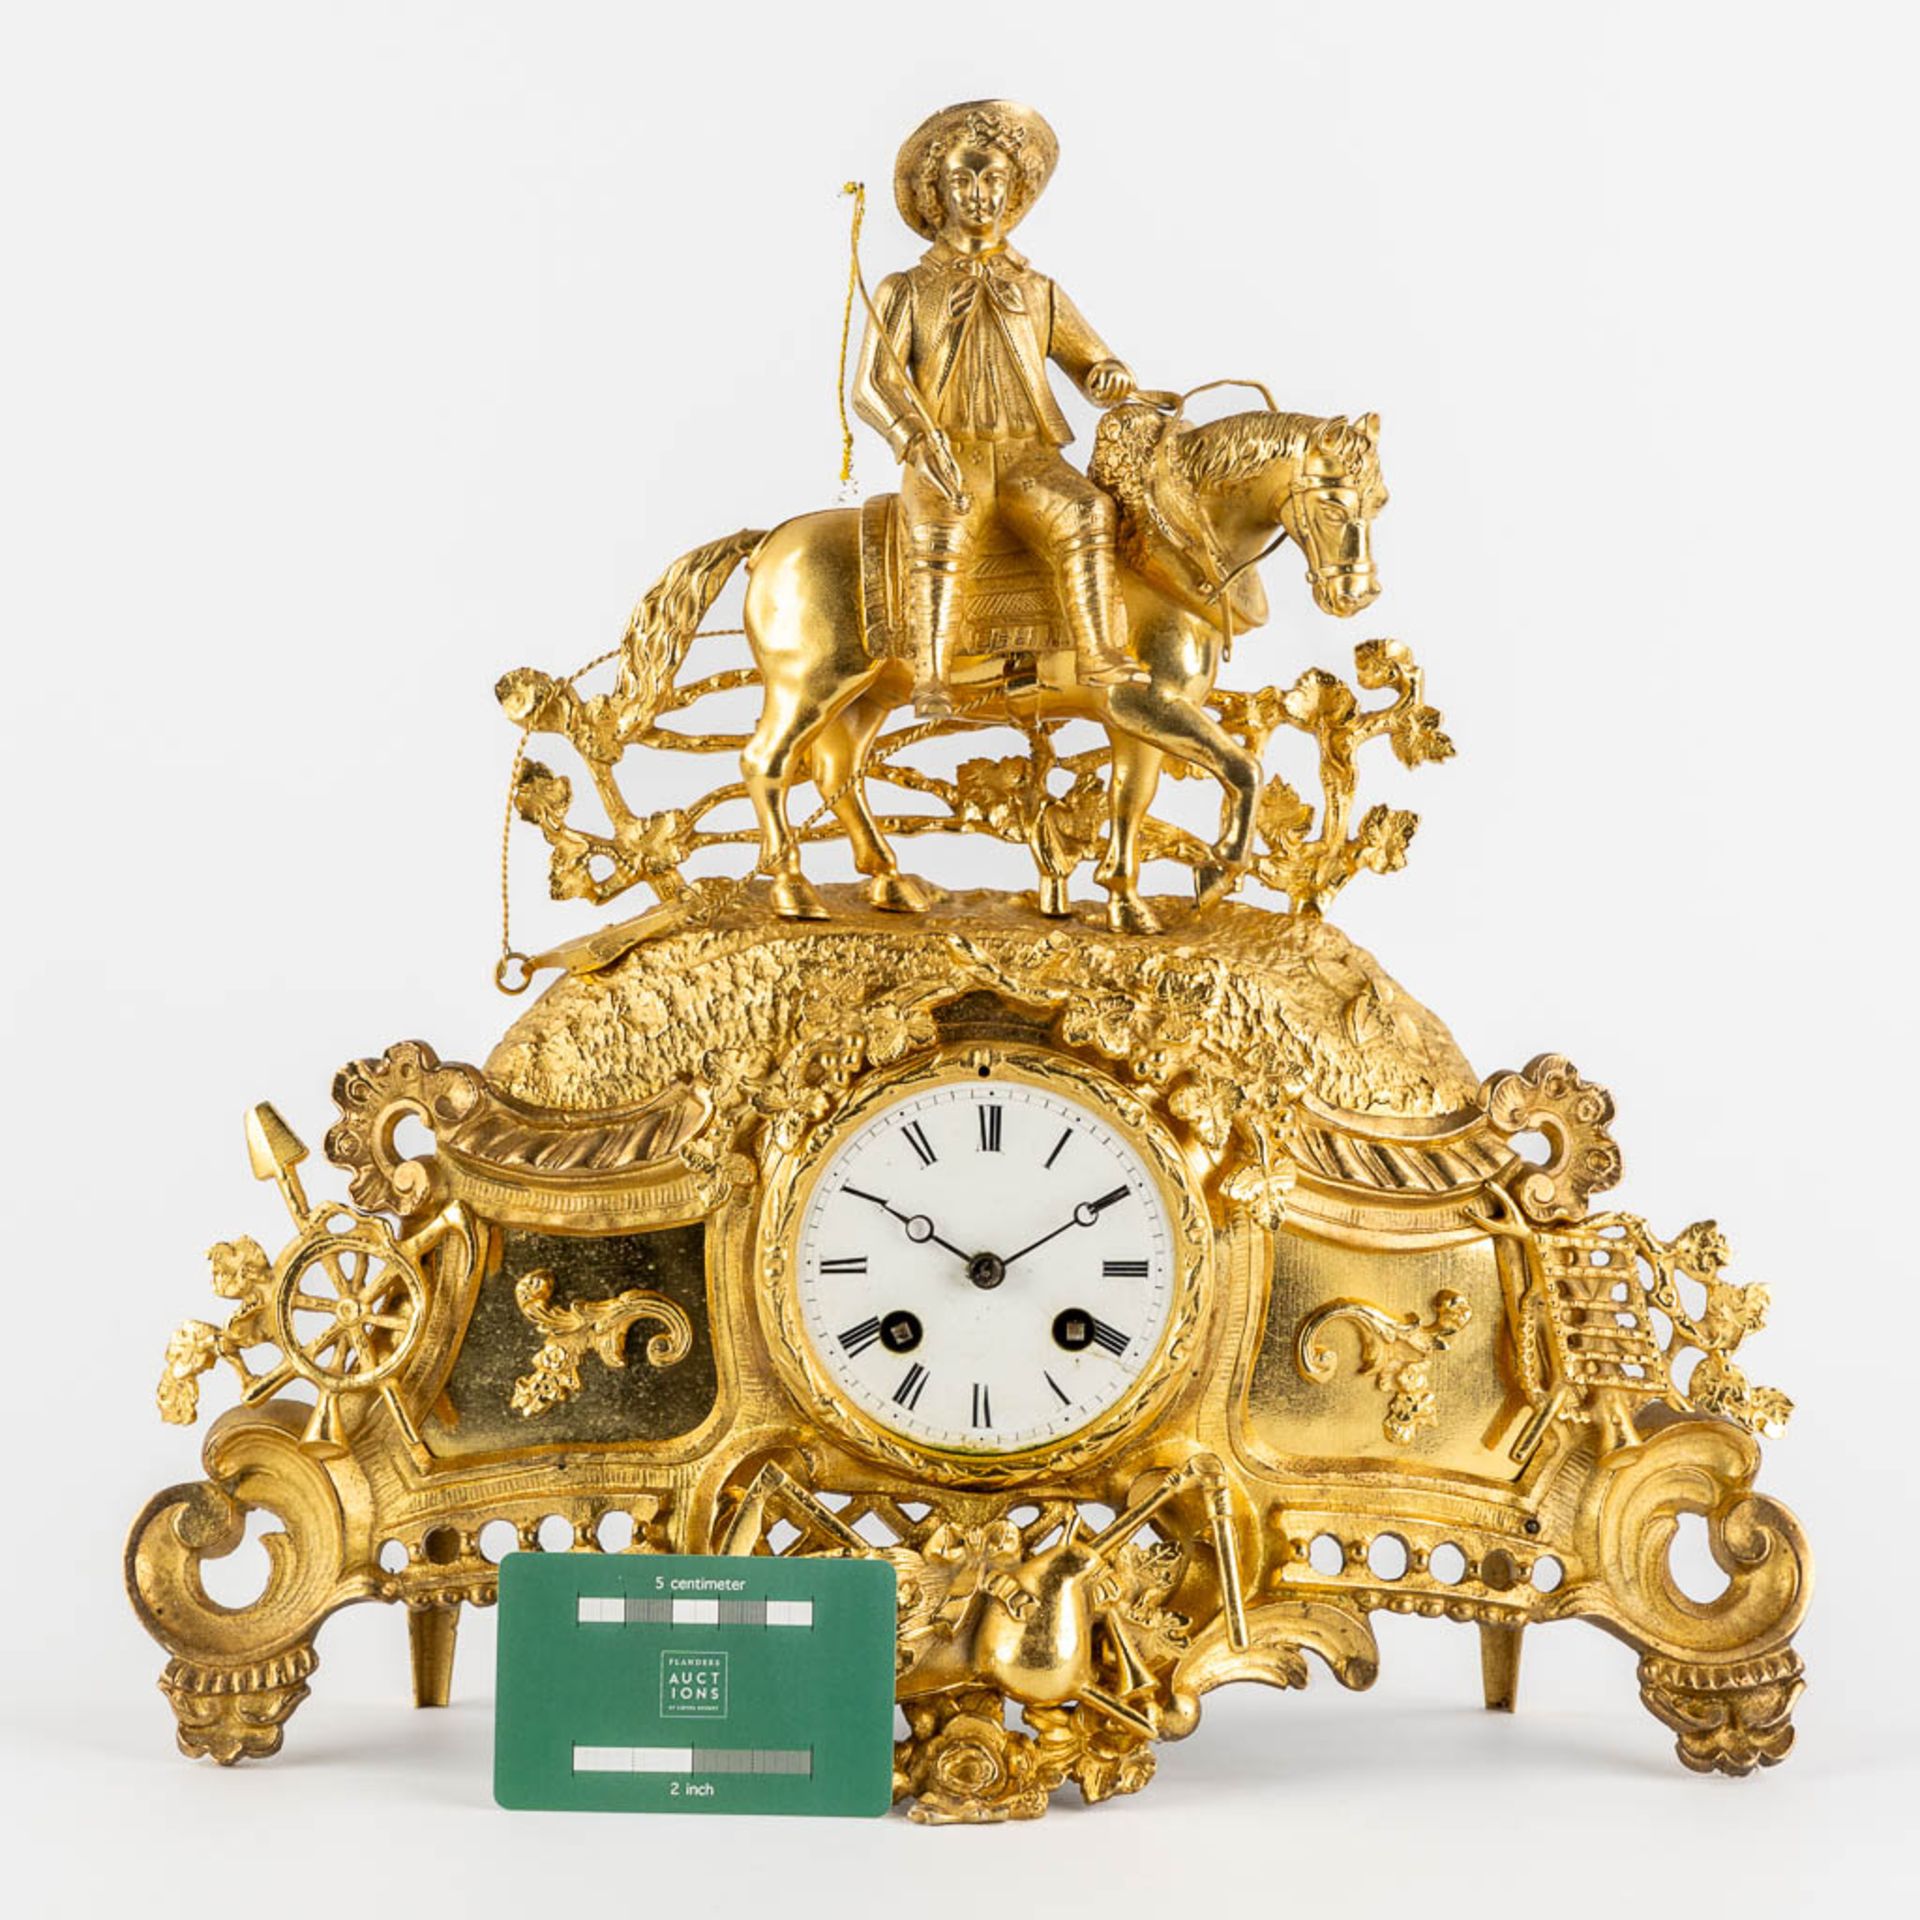 A mantle clock with a 'Horse Rider', gilt bronze. France, 19th C. (L:11,5 x W:38 x H:37 cm) - Image 2 of 12